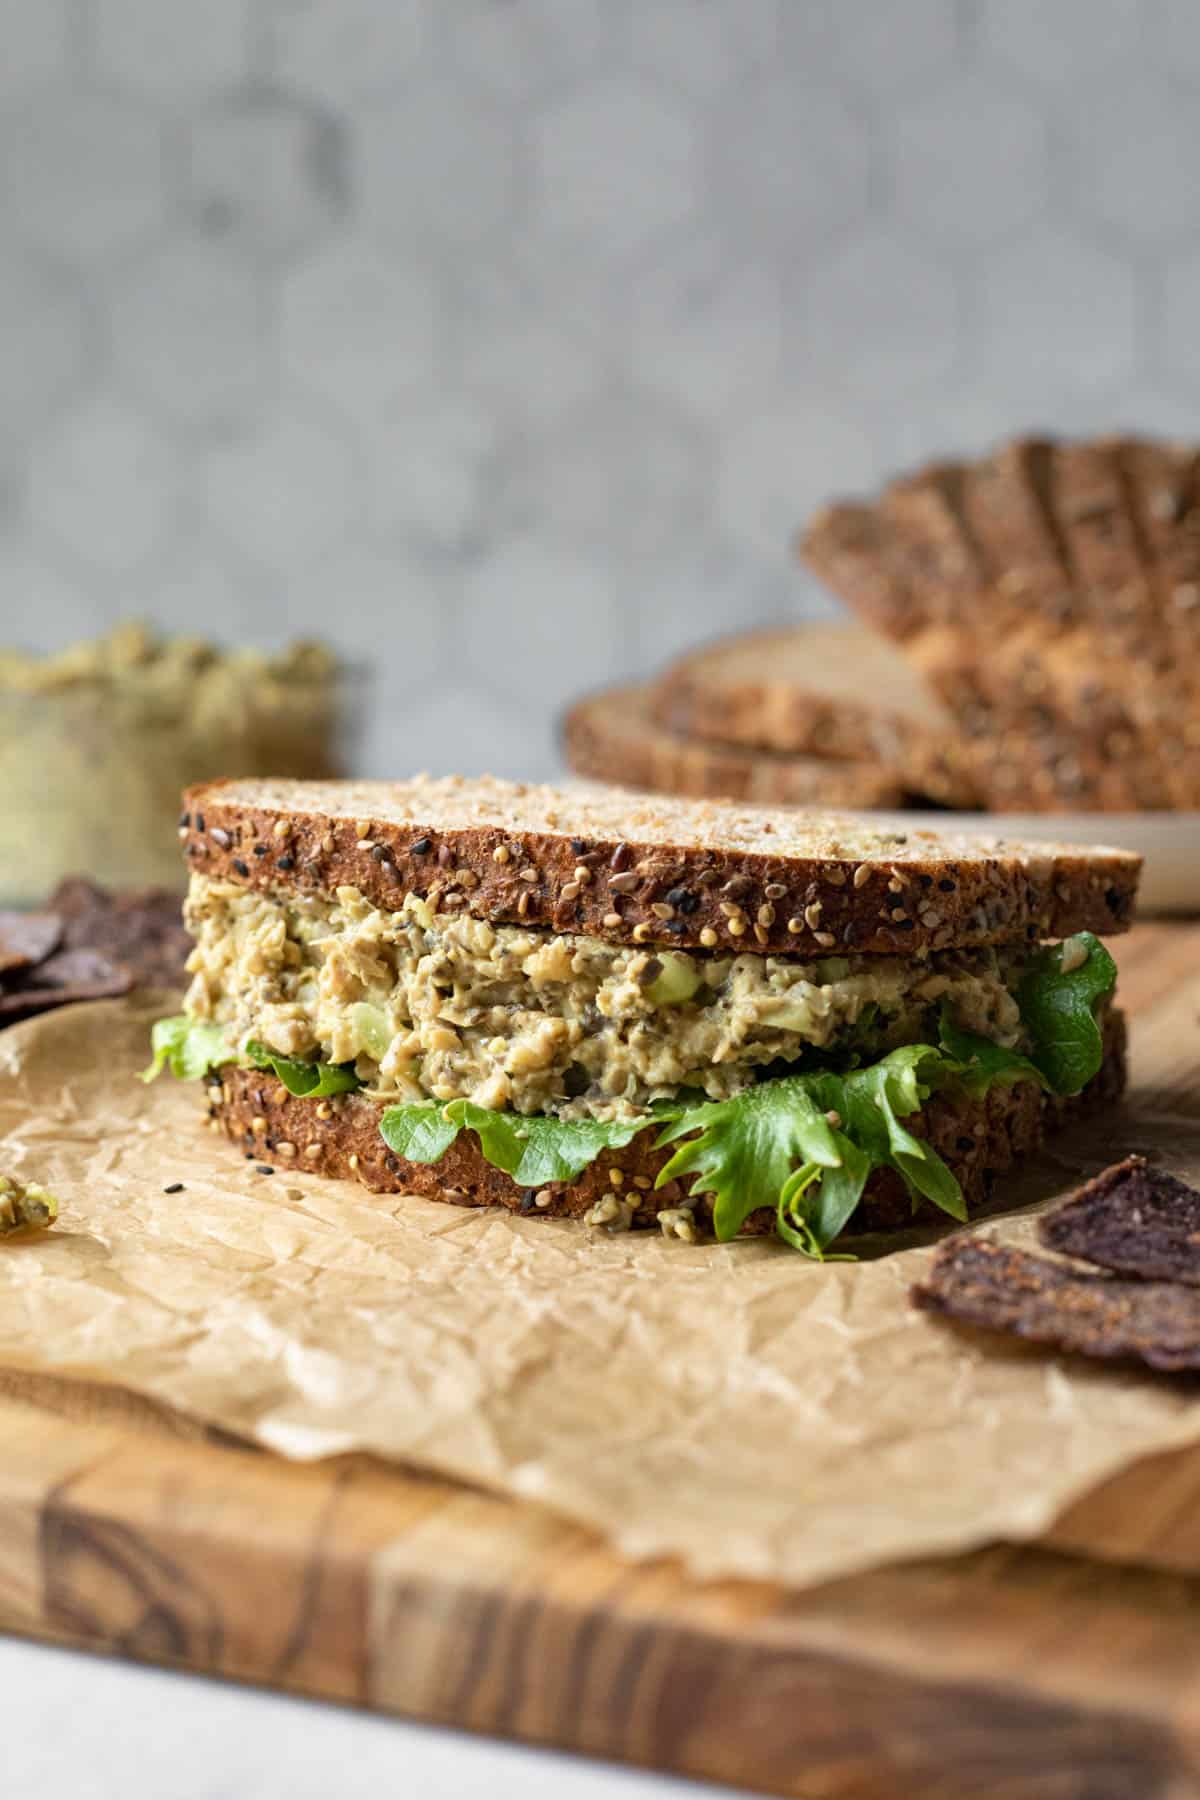 Vegan egg salad sandwich made with whole-grain bread and lettuce.